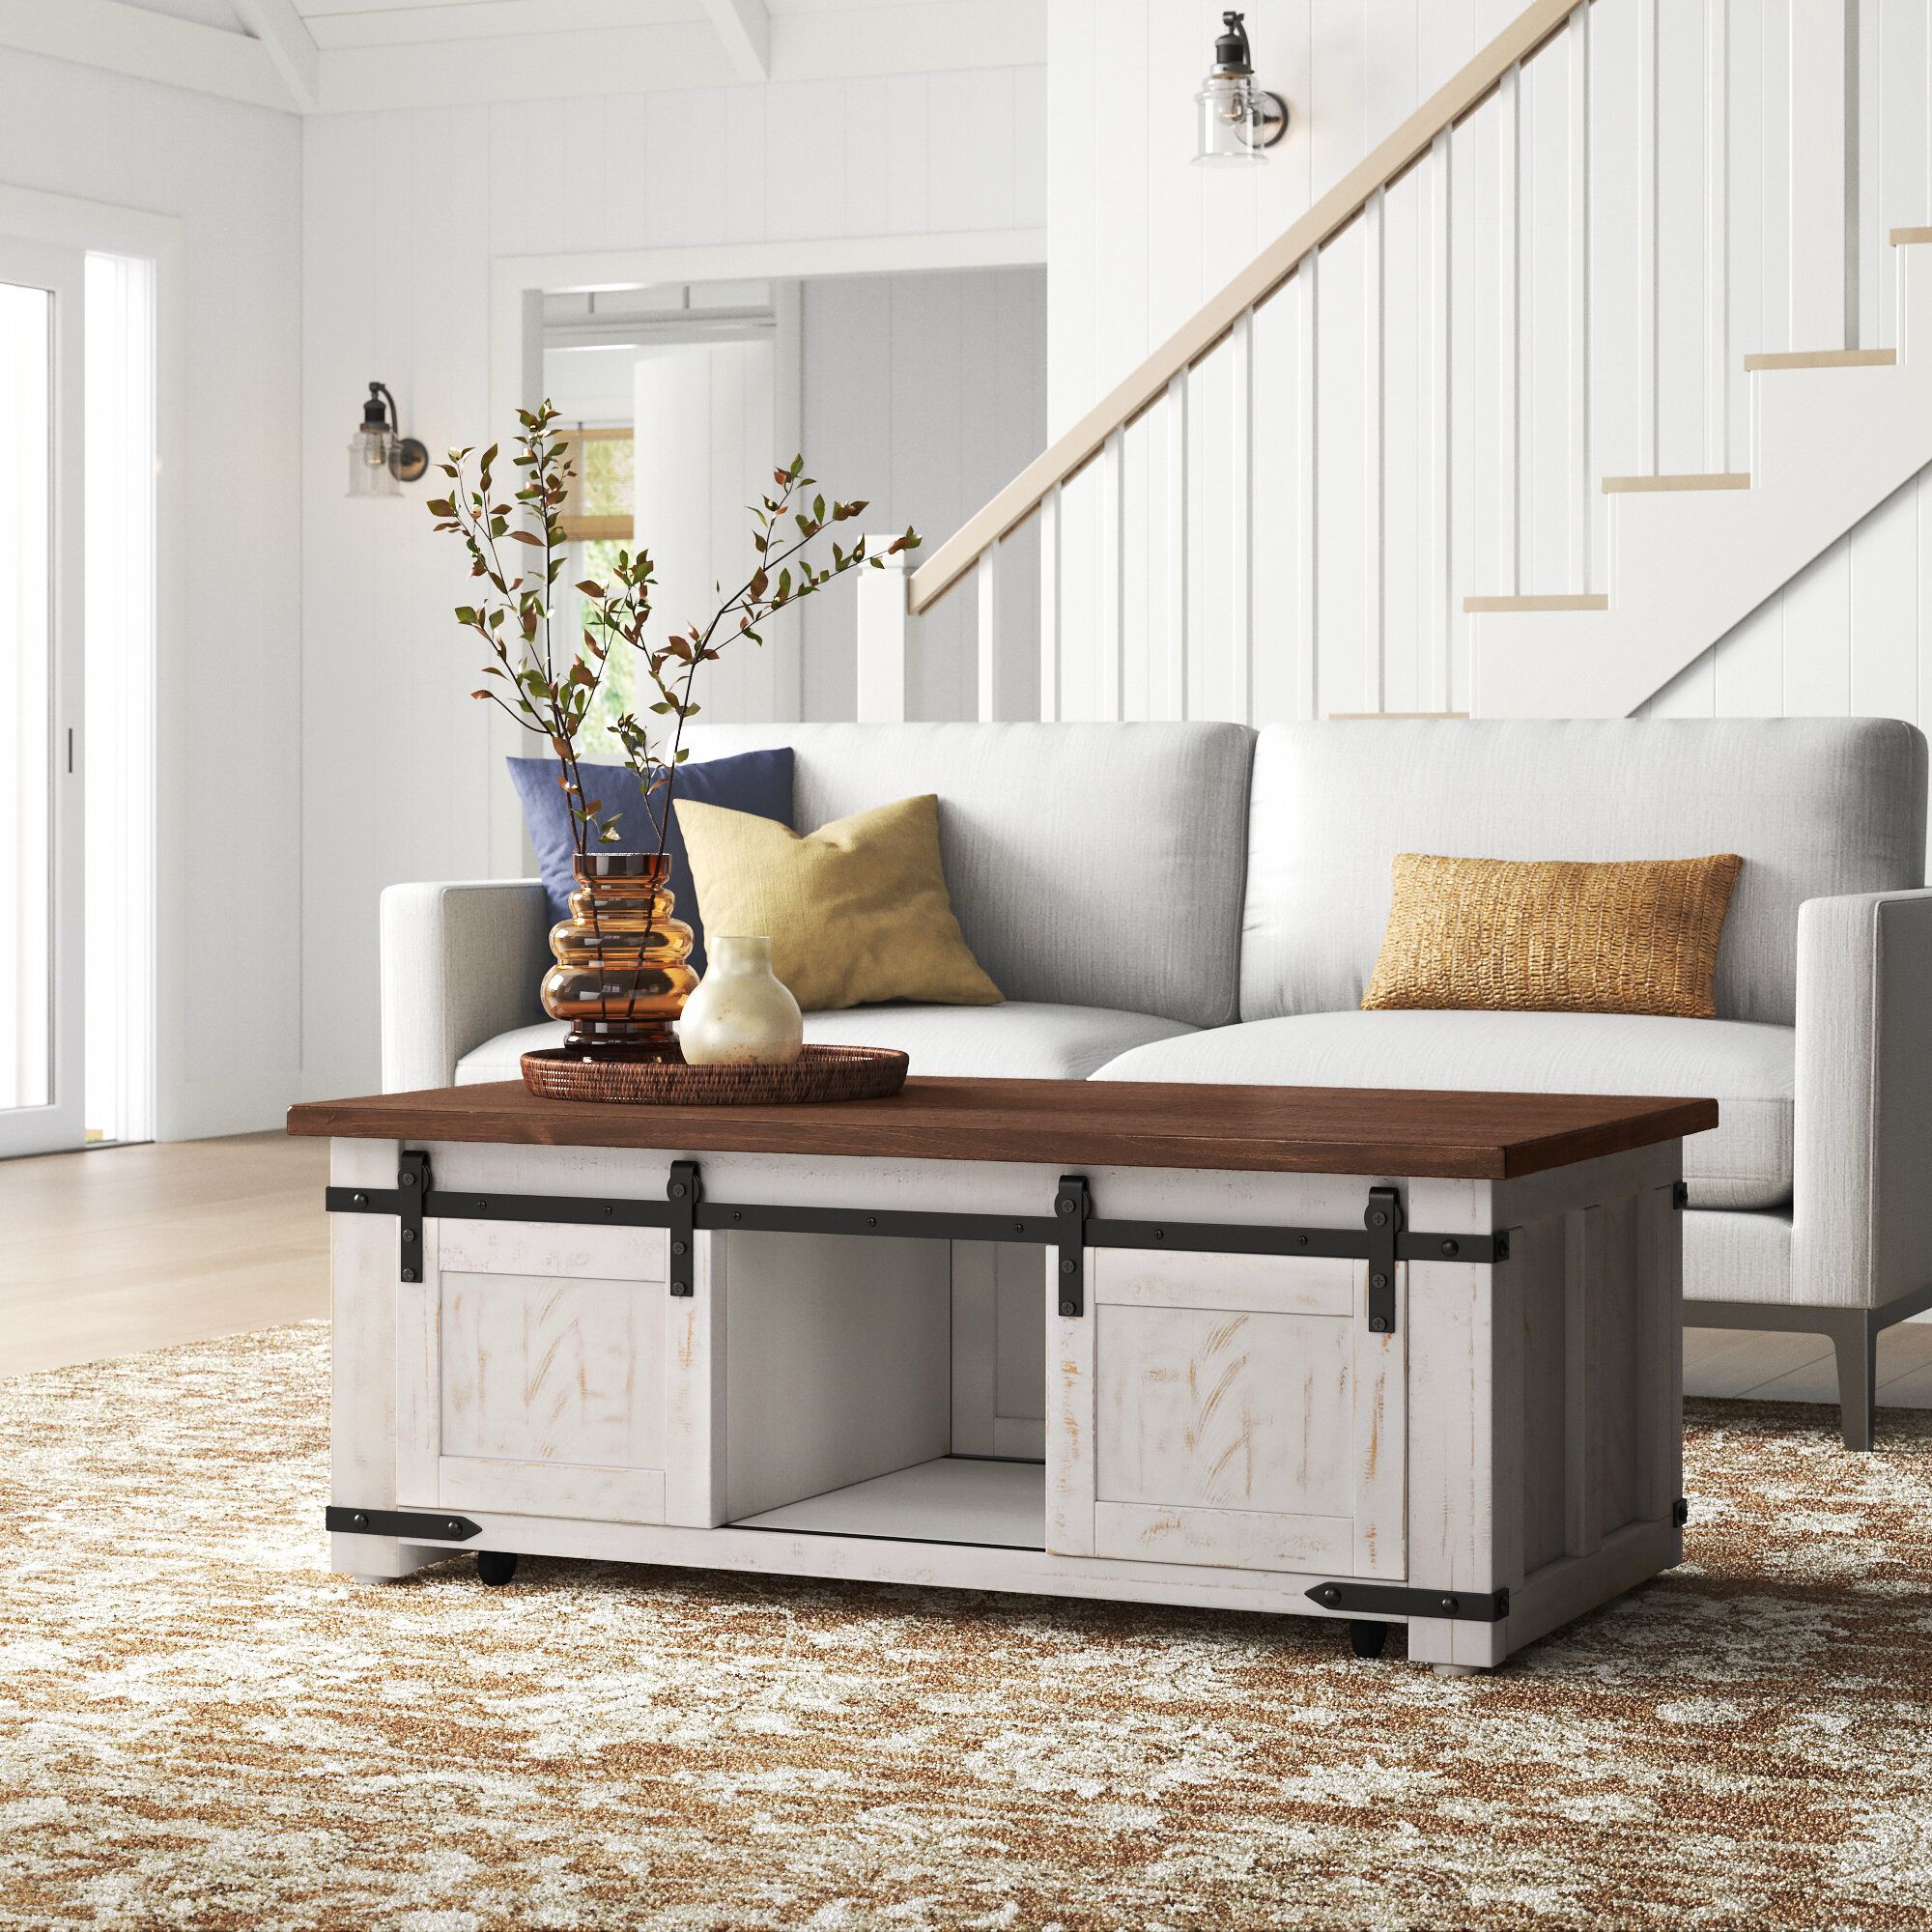 Sand & Stable Sean Coffee Table & Reviews | Wayfair Inside Coffee Tables With Storage And Barn Doors (View 12 of 15)